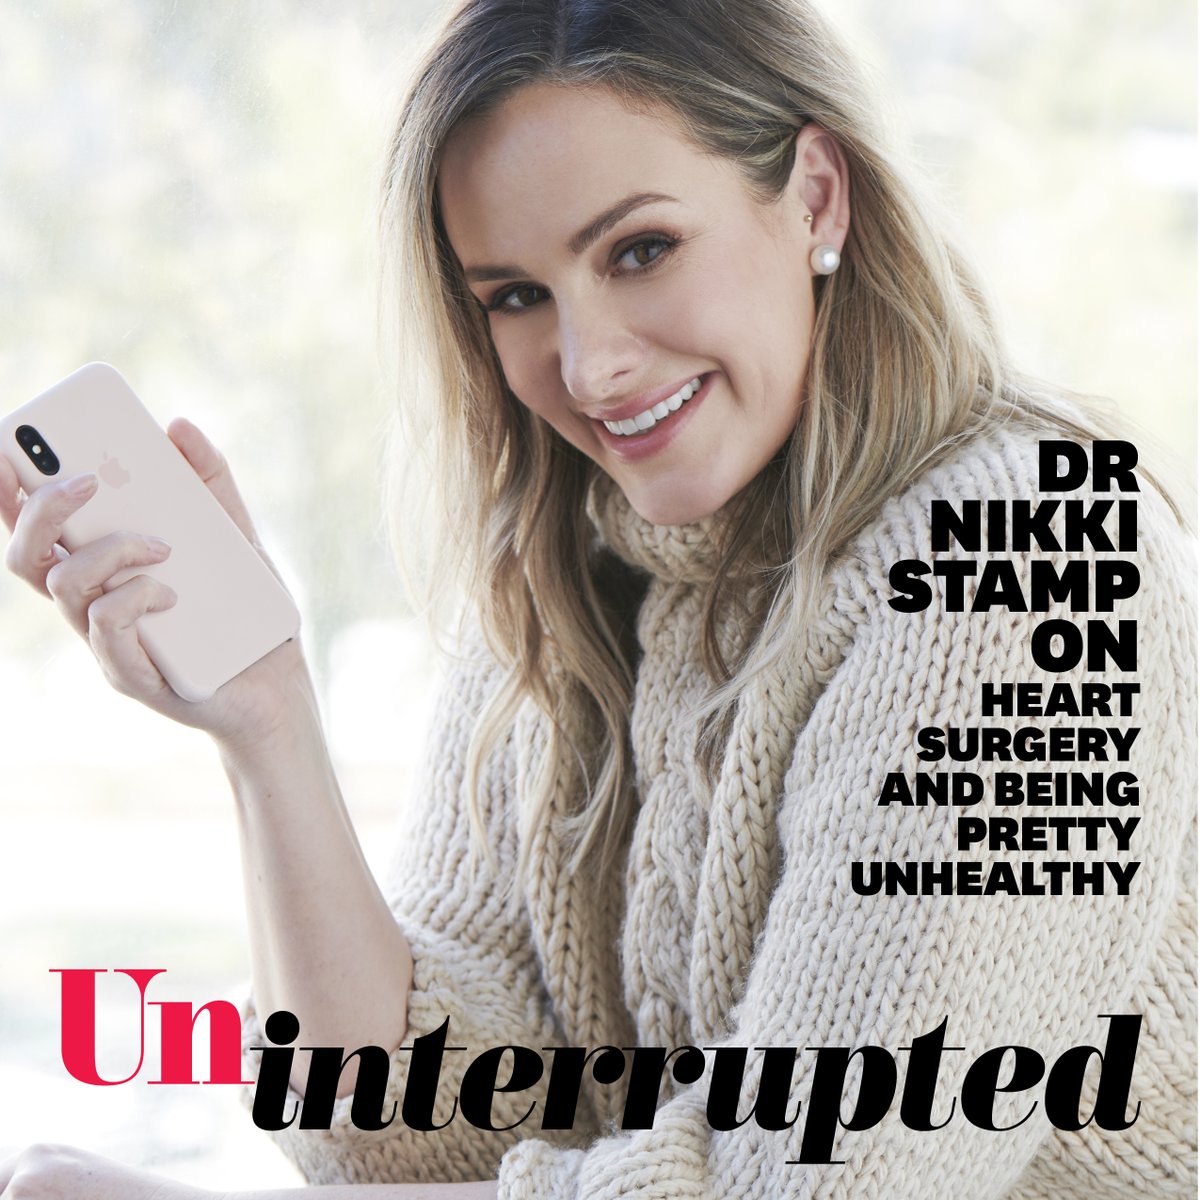 🎧 Looking for something to listen to on your commute? We recommend checking out @drnikkistamp on the latest episode of @womenshealthaus' Uninterrupted podcast! Listen here: hubs.ly/H0n7F1y0 #WHuninterrupted #prettyunhealthy